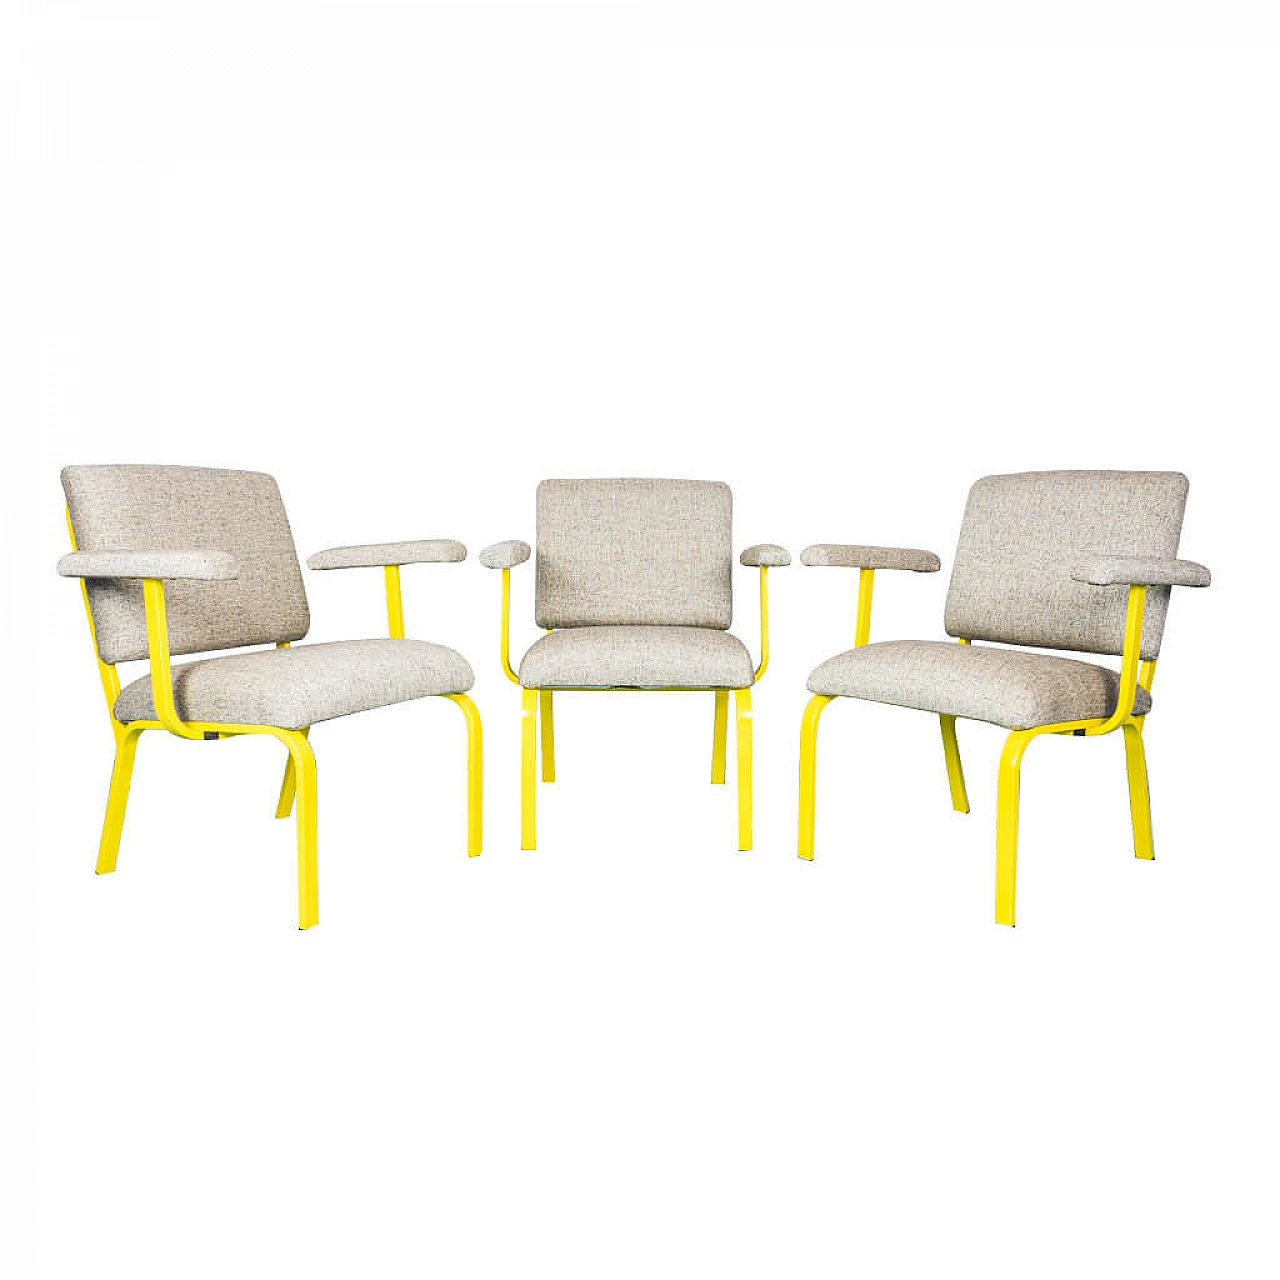 Set of 3 handcrafted chairs in yellow metal and gray fabric, 70s 1209428